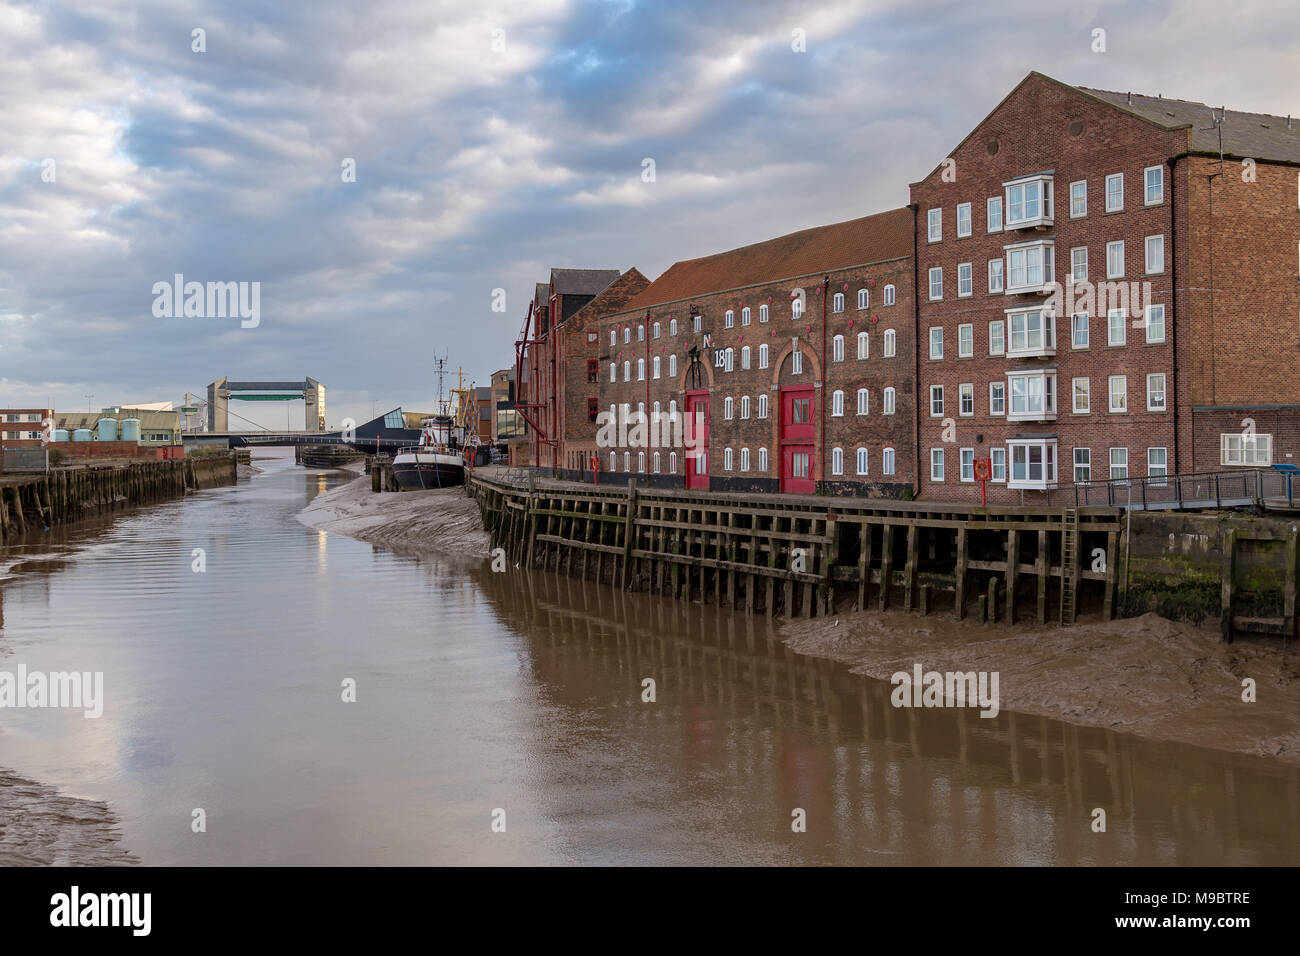 Kingston upon Hull, England, UK - May 02, 2016: View from Clarence St over the River Hull with the Swing Bridge, Myton Bridge Stock Photo